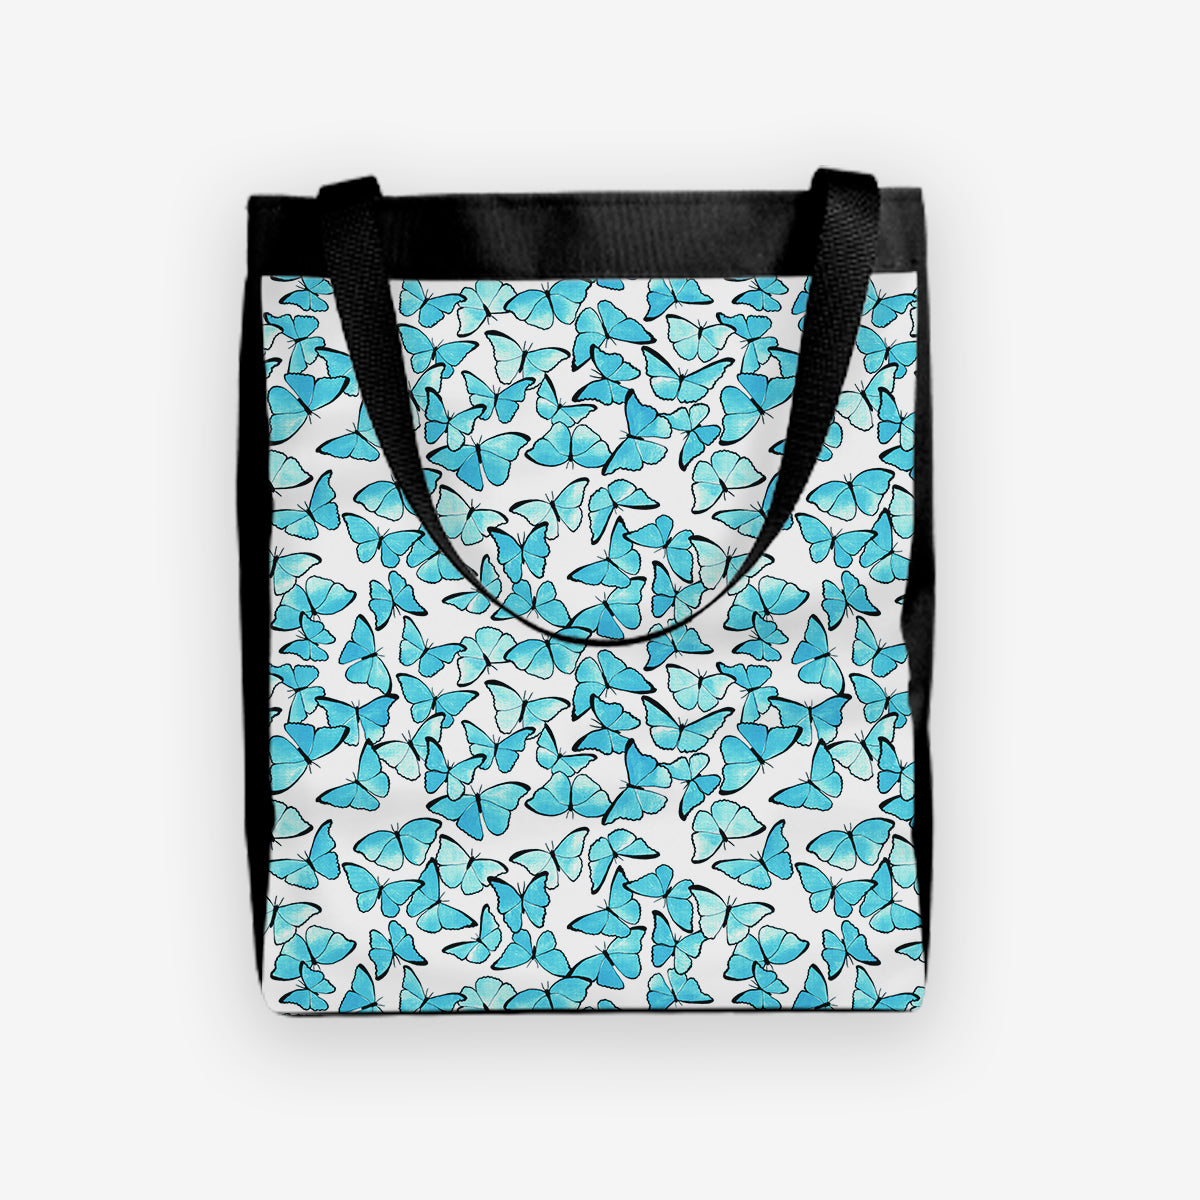 Designer-Style Tote Bag Is an Incredible Find